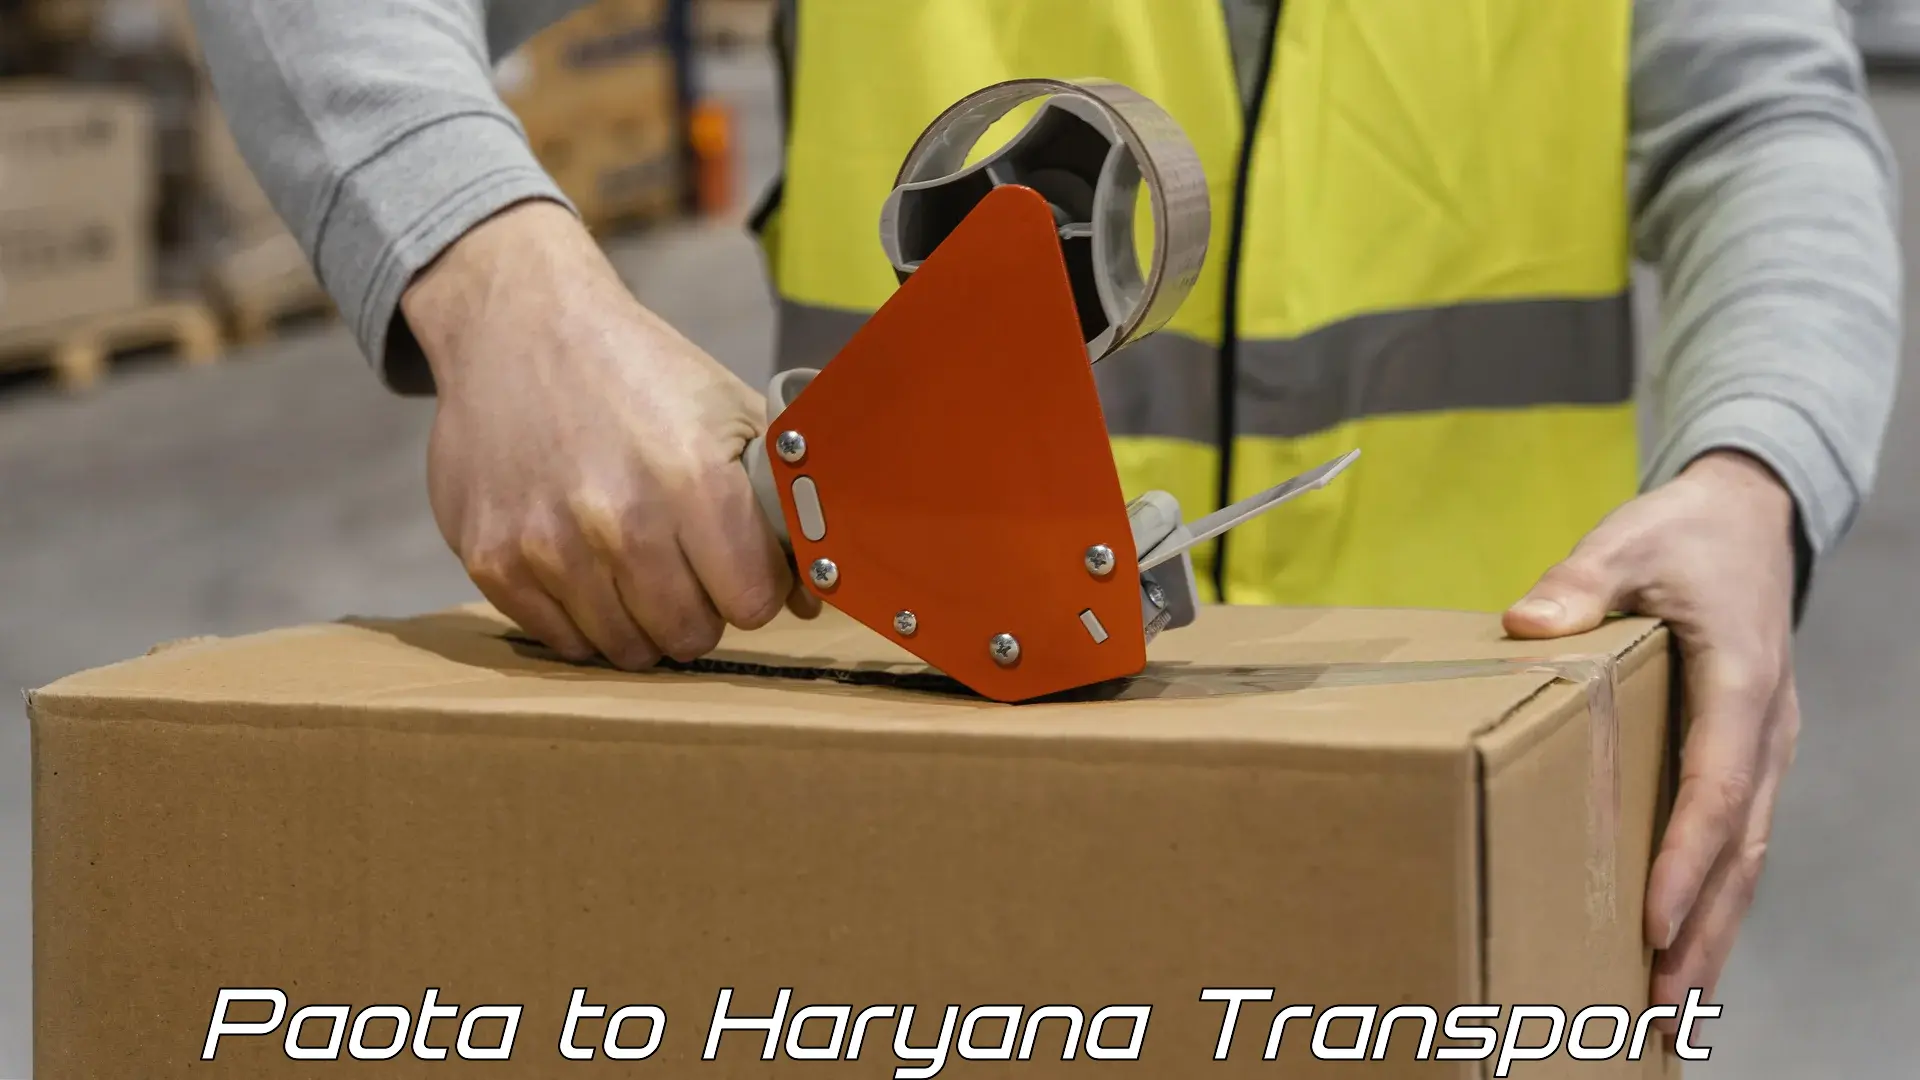 Transport shared services Paota to NCR Haryana